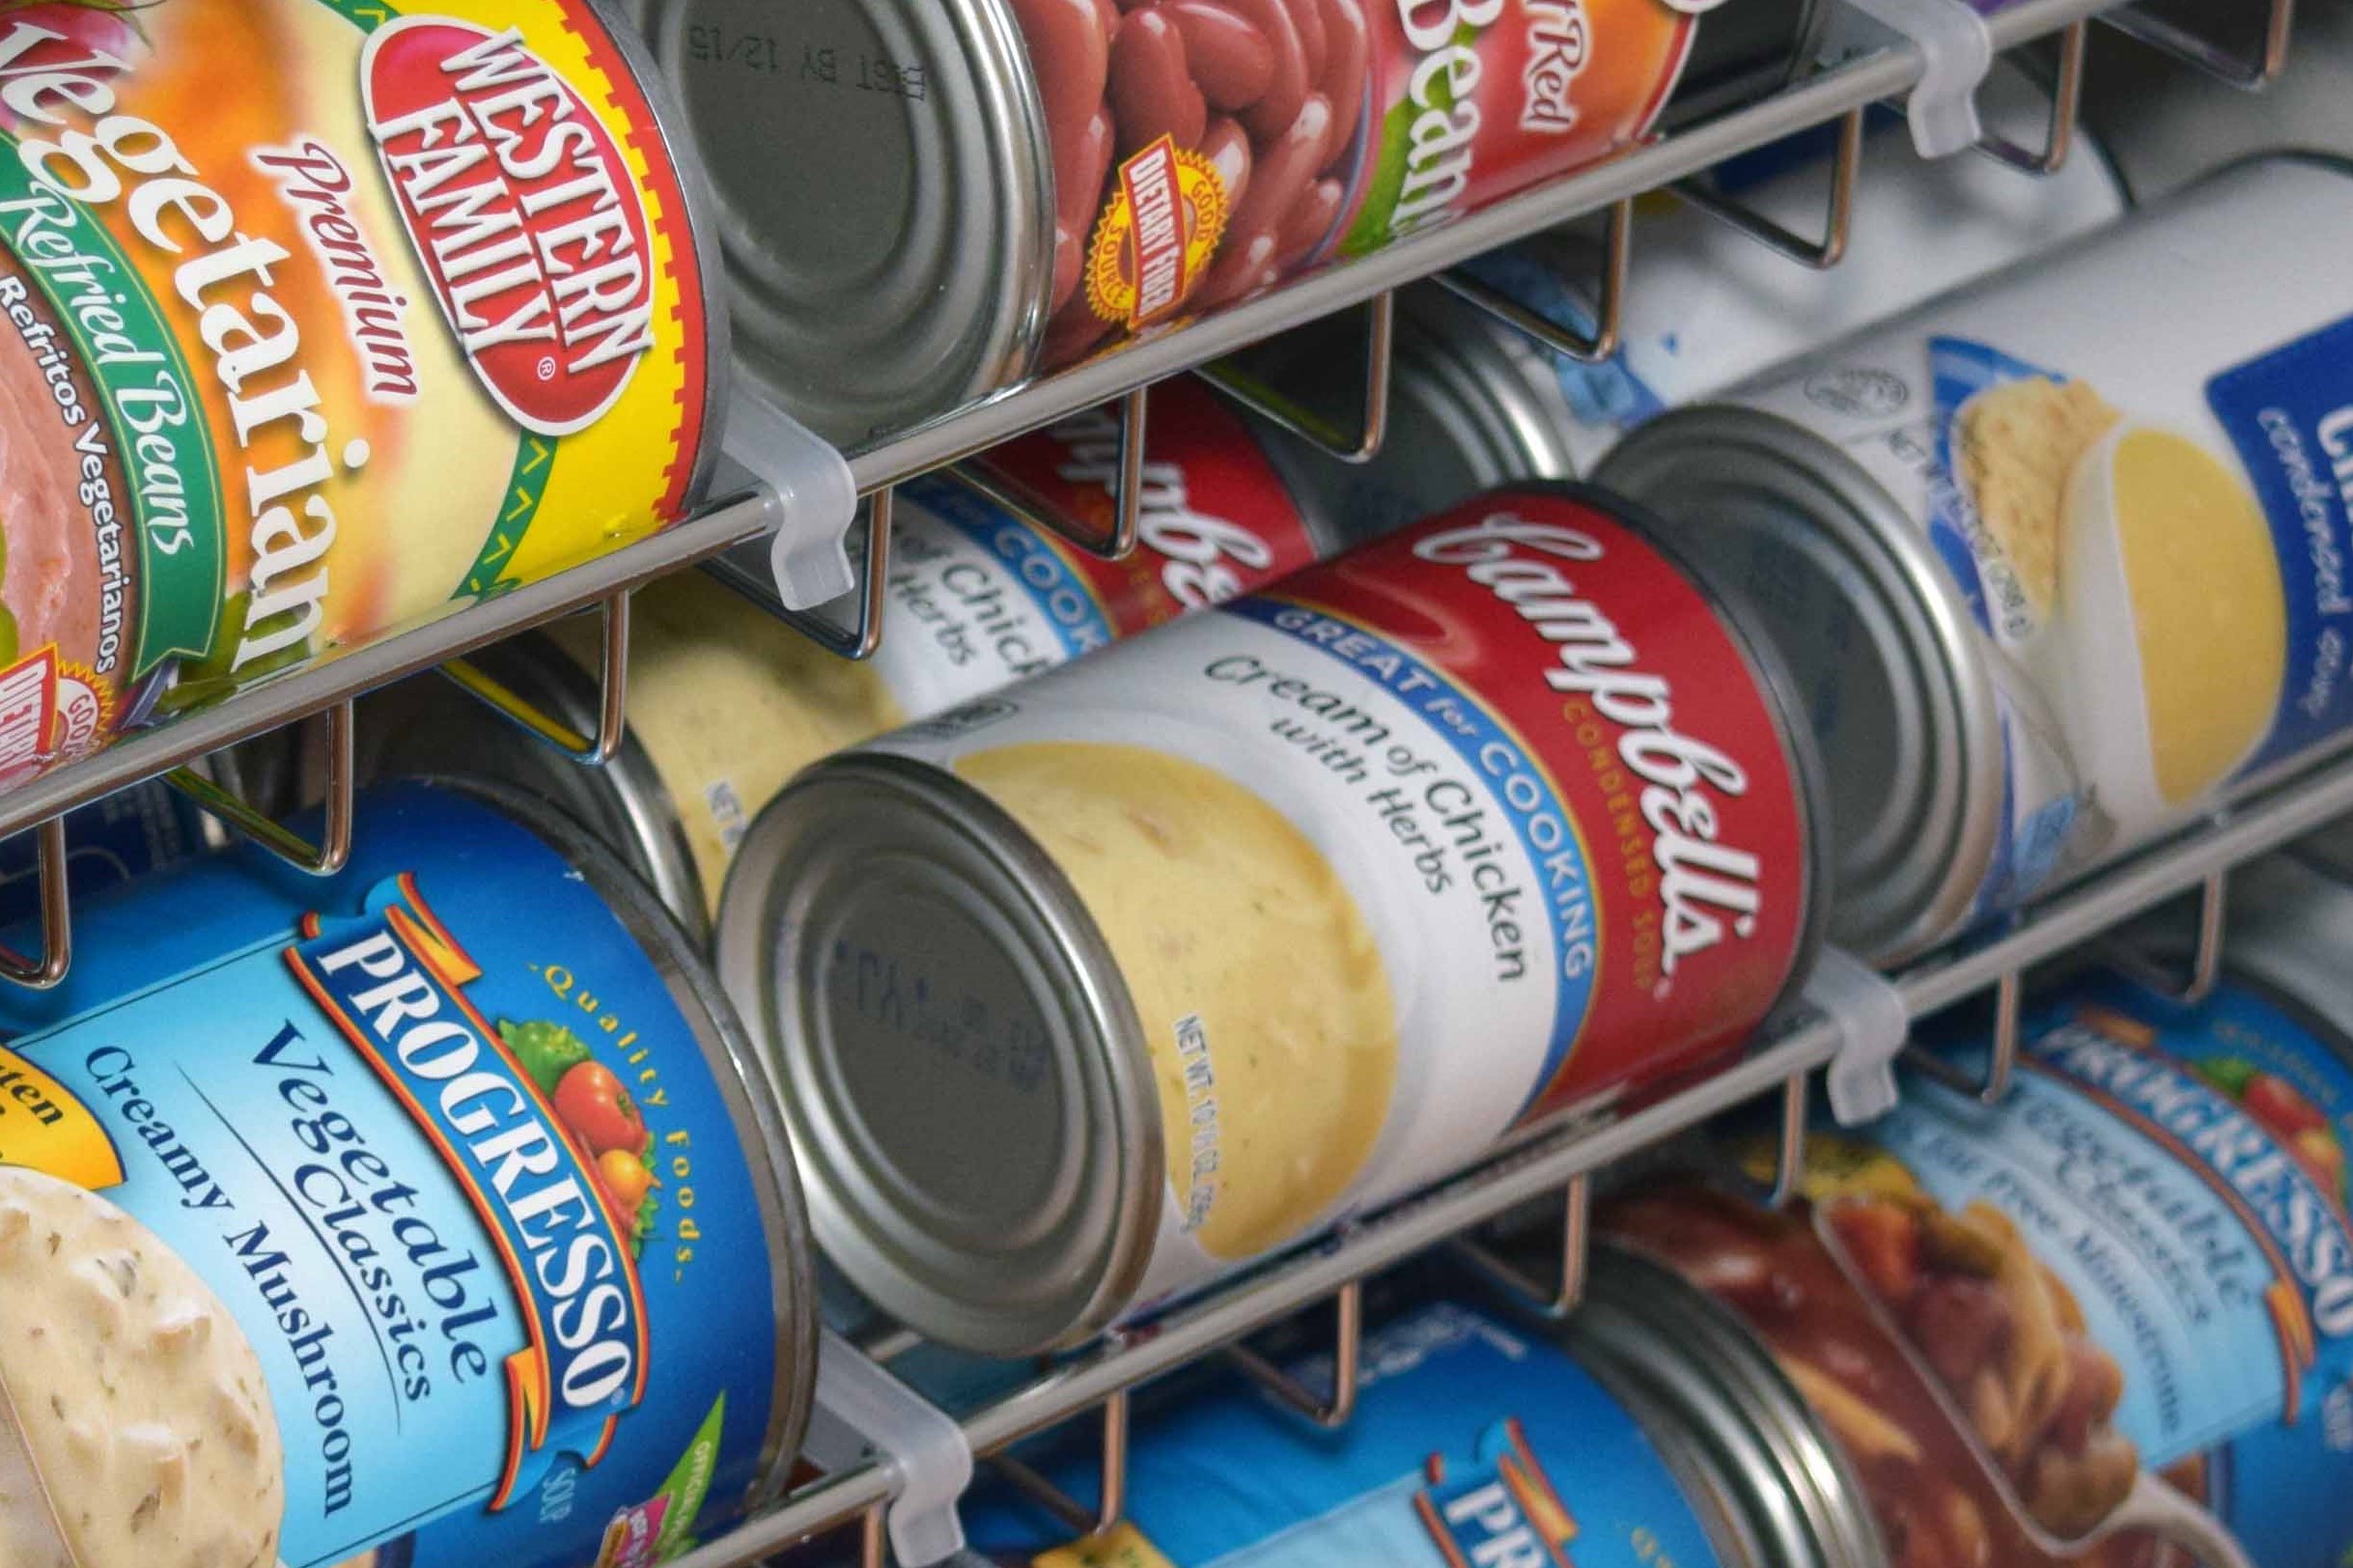 Storing Canned Food - 4 Rotation Ideas - Survival Prepper